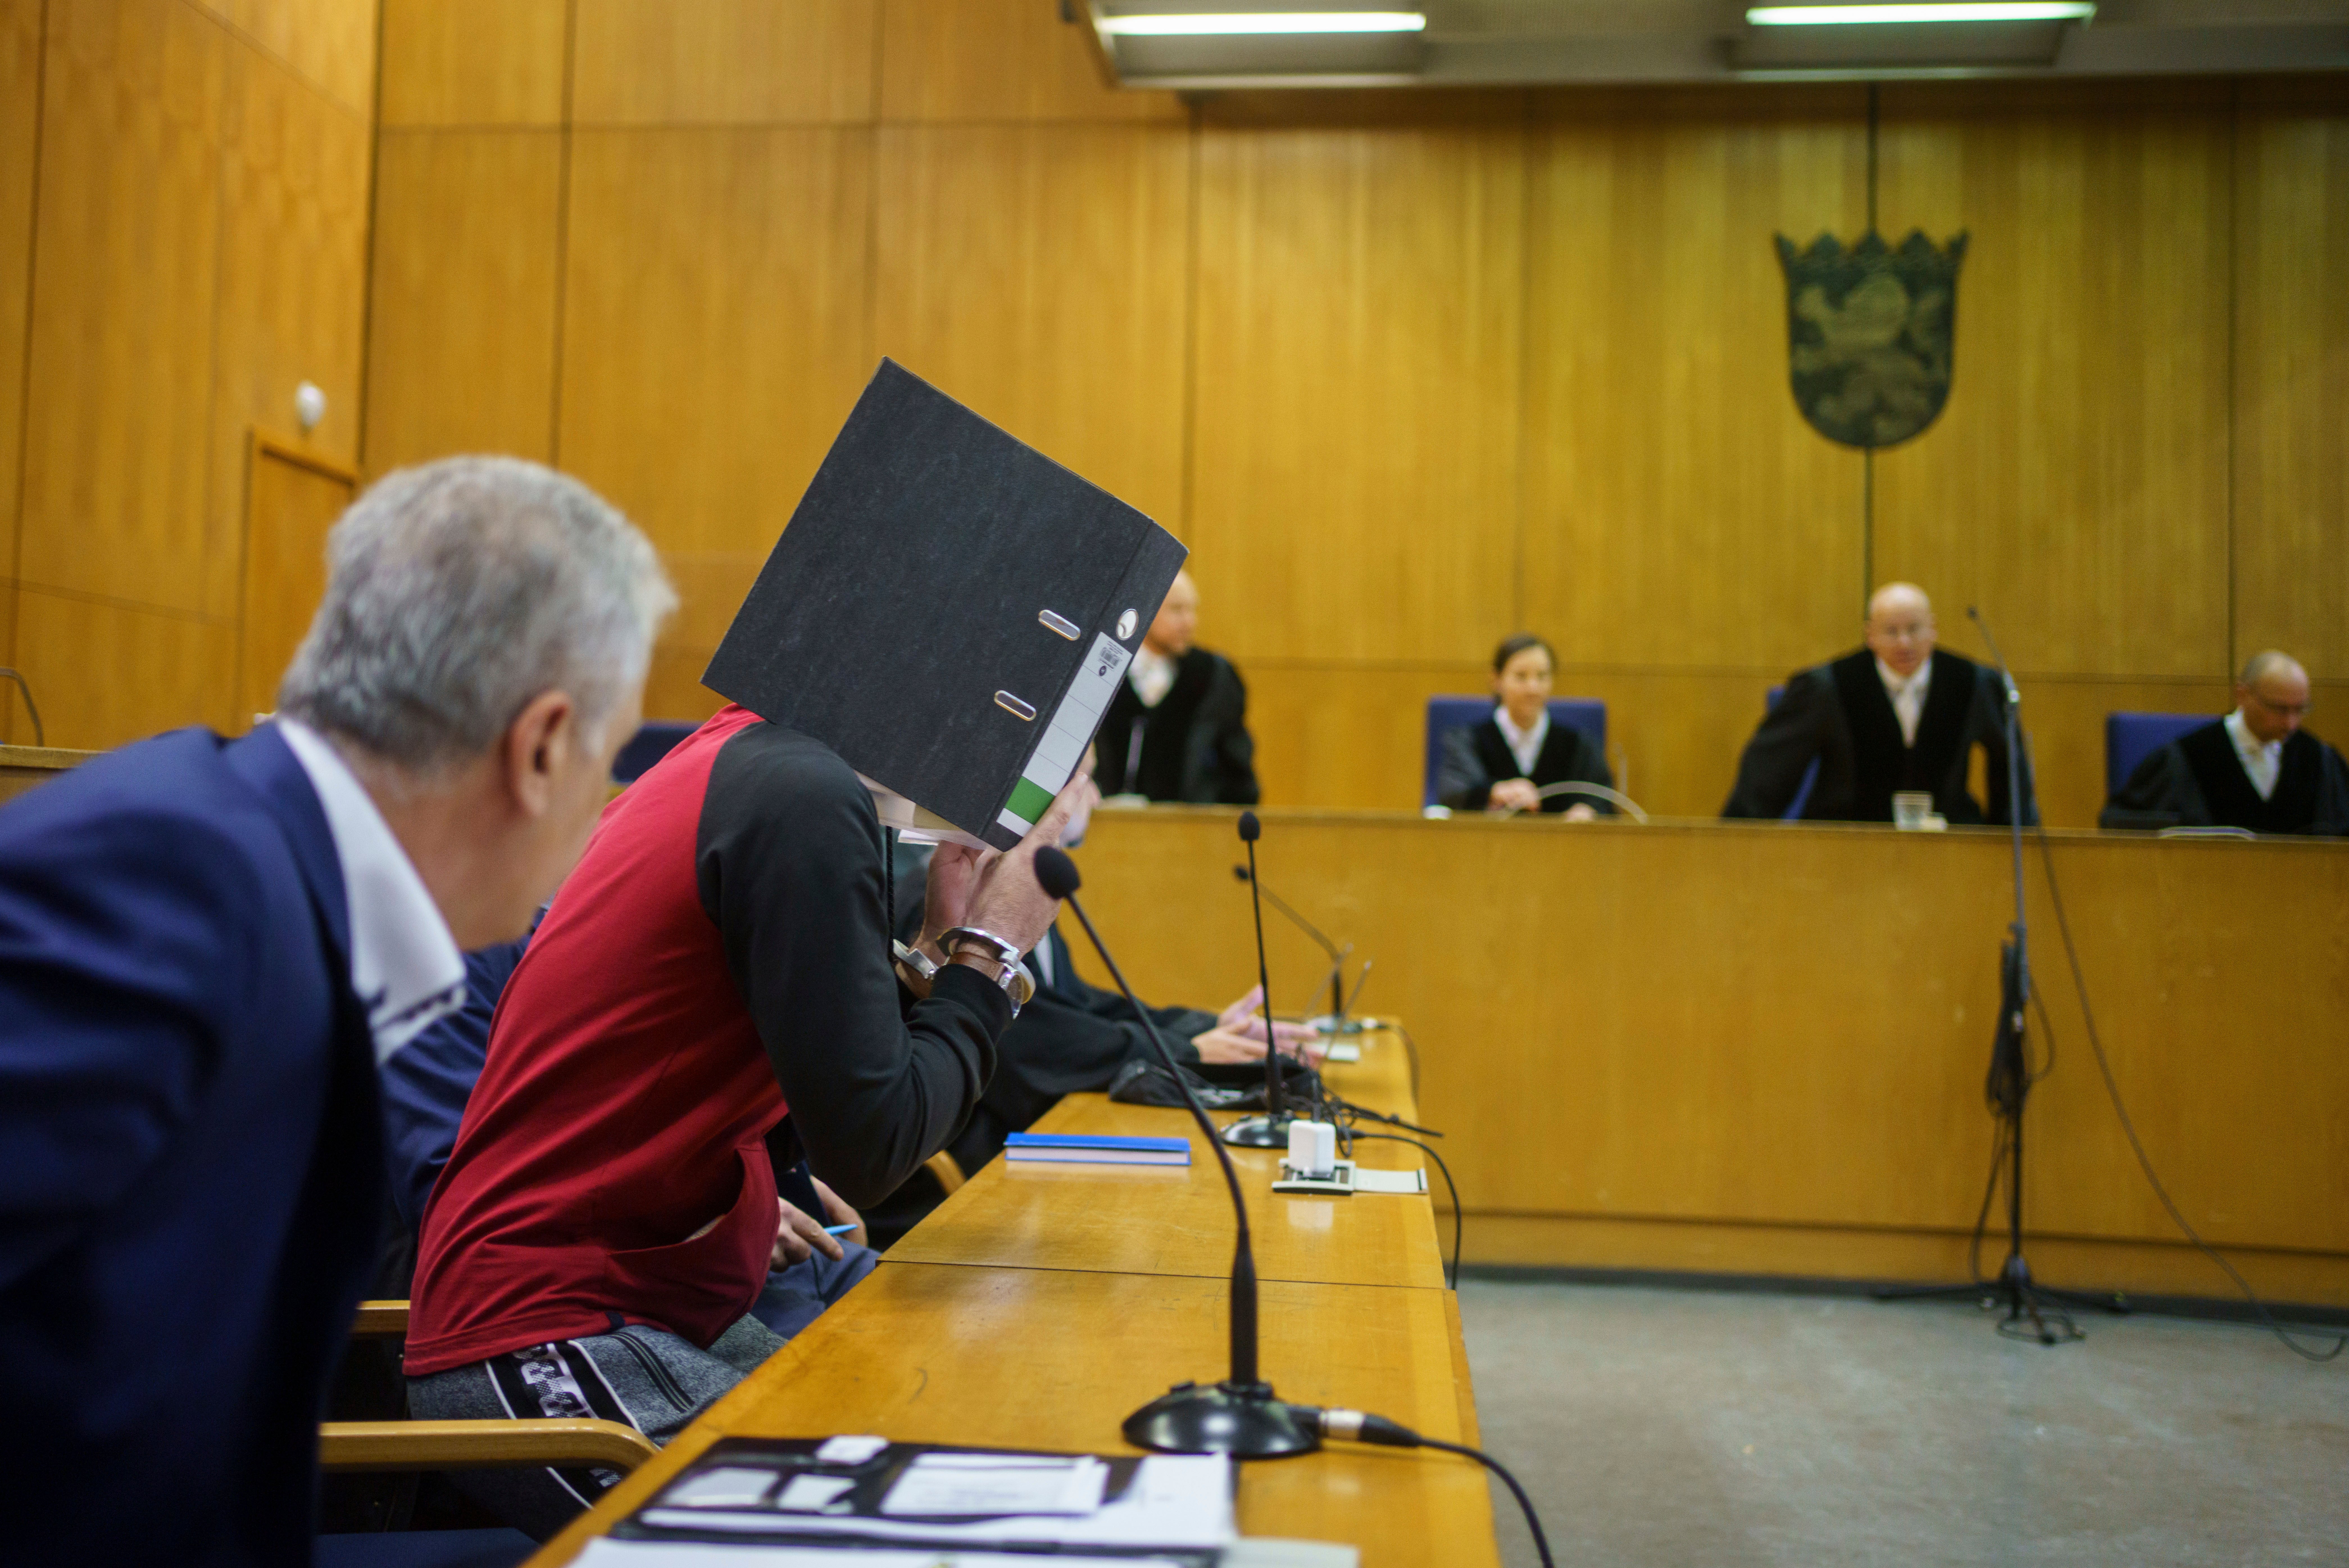 Iraqi Taha Al-J takes his seat in the dock before the verdict is handed down in Frankfurt, Germany